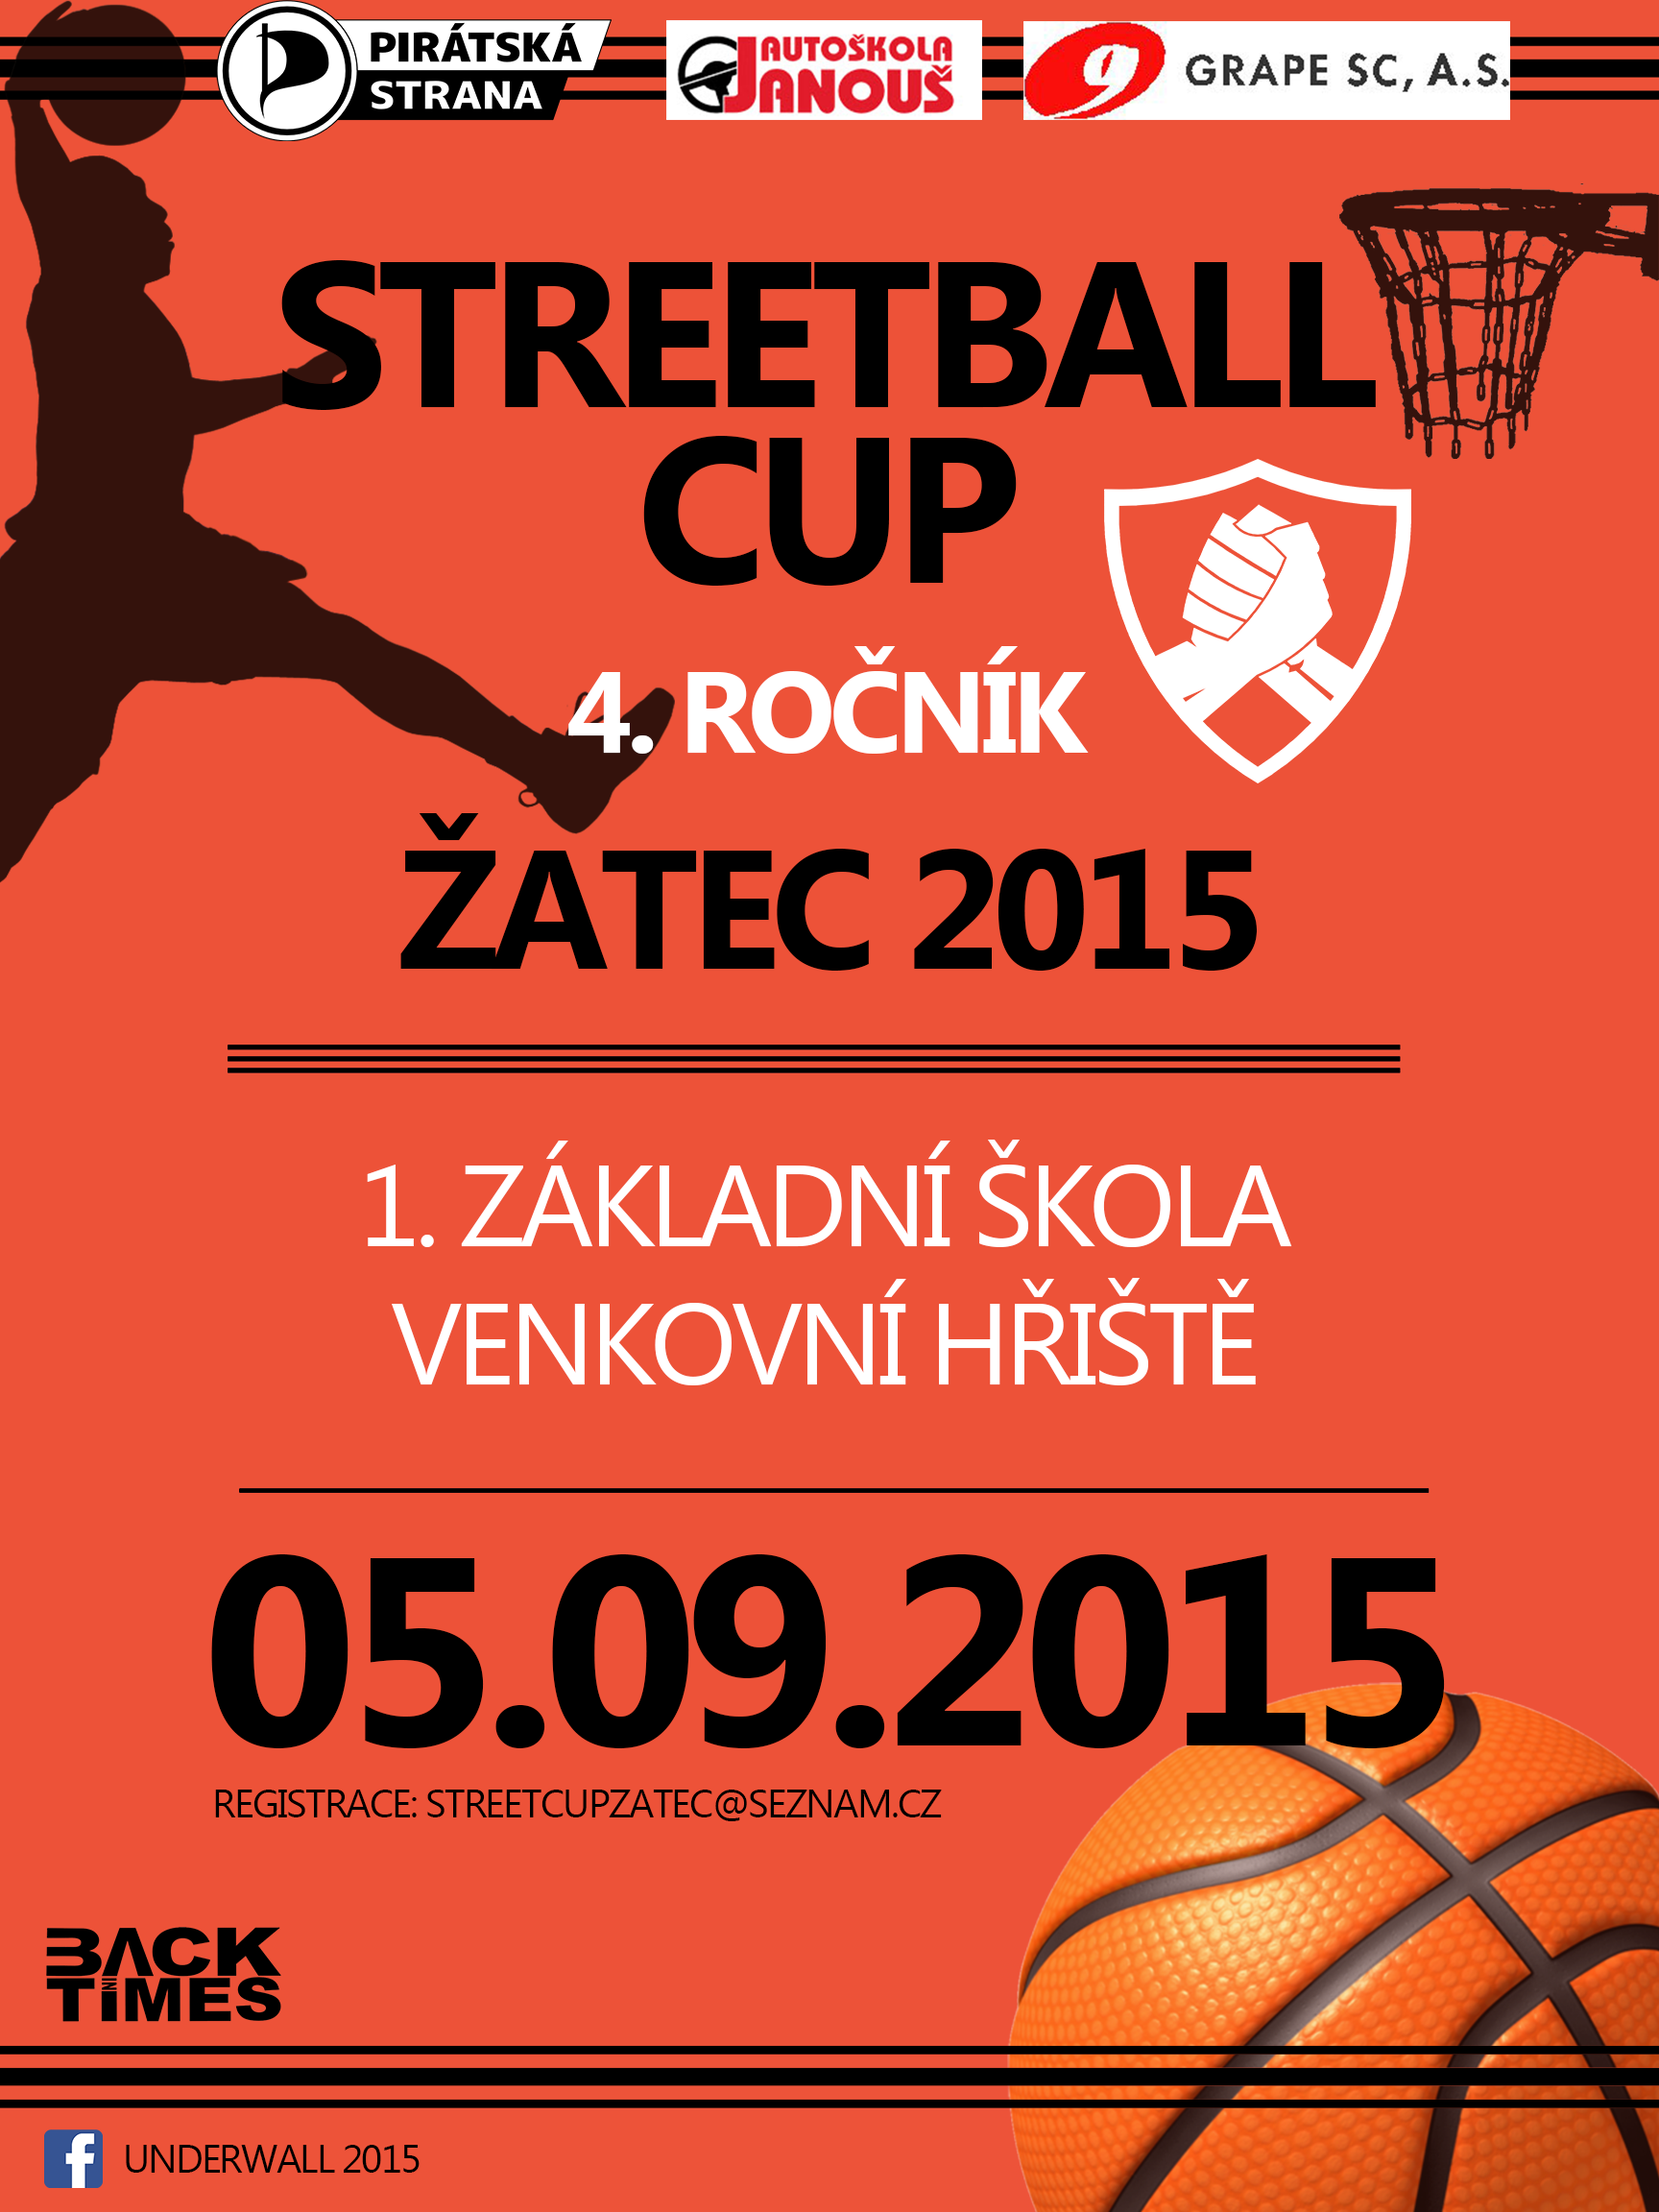 Streetball Cup atec 2015